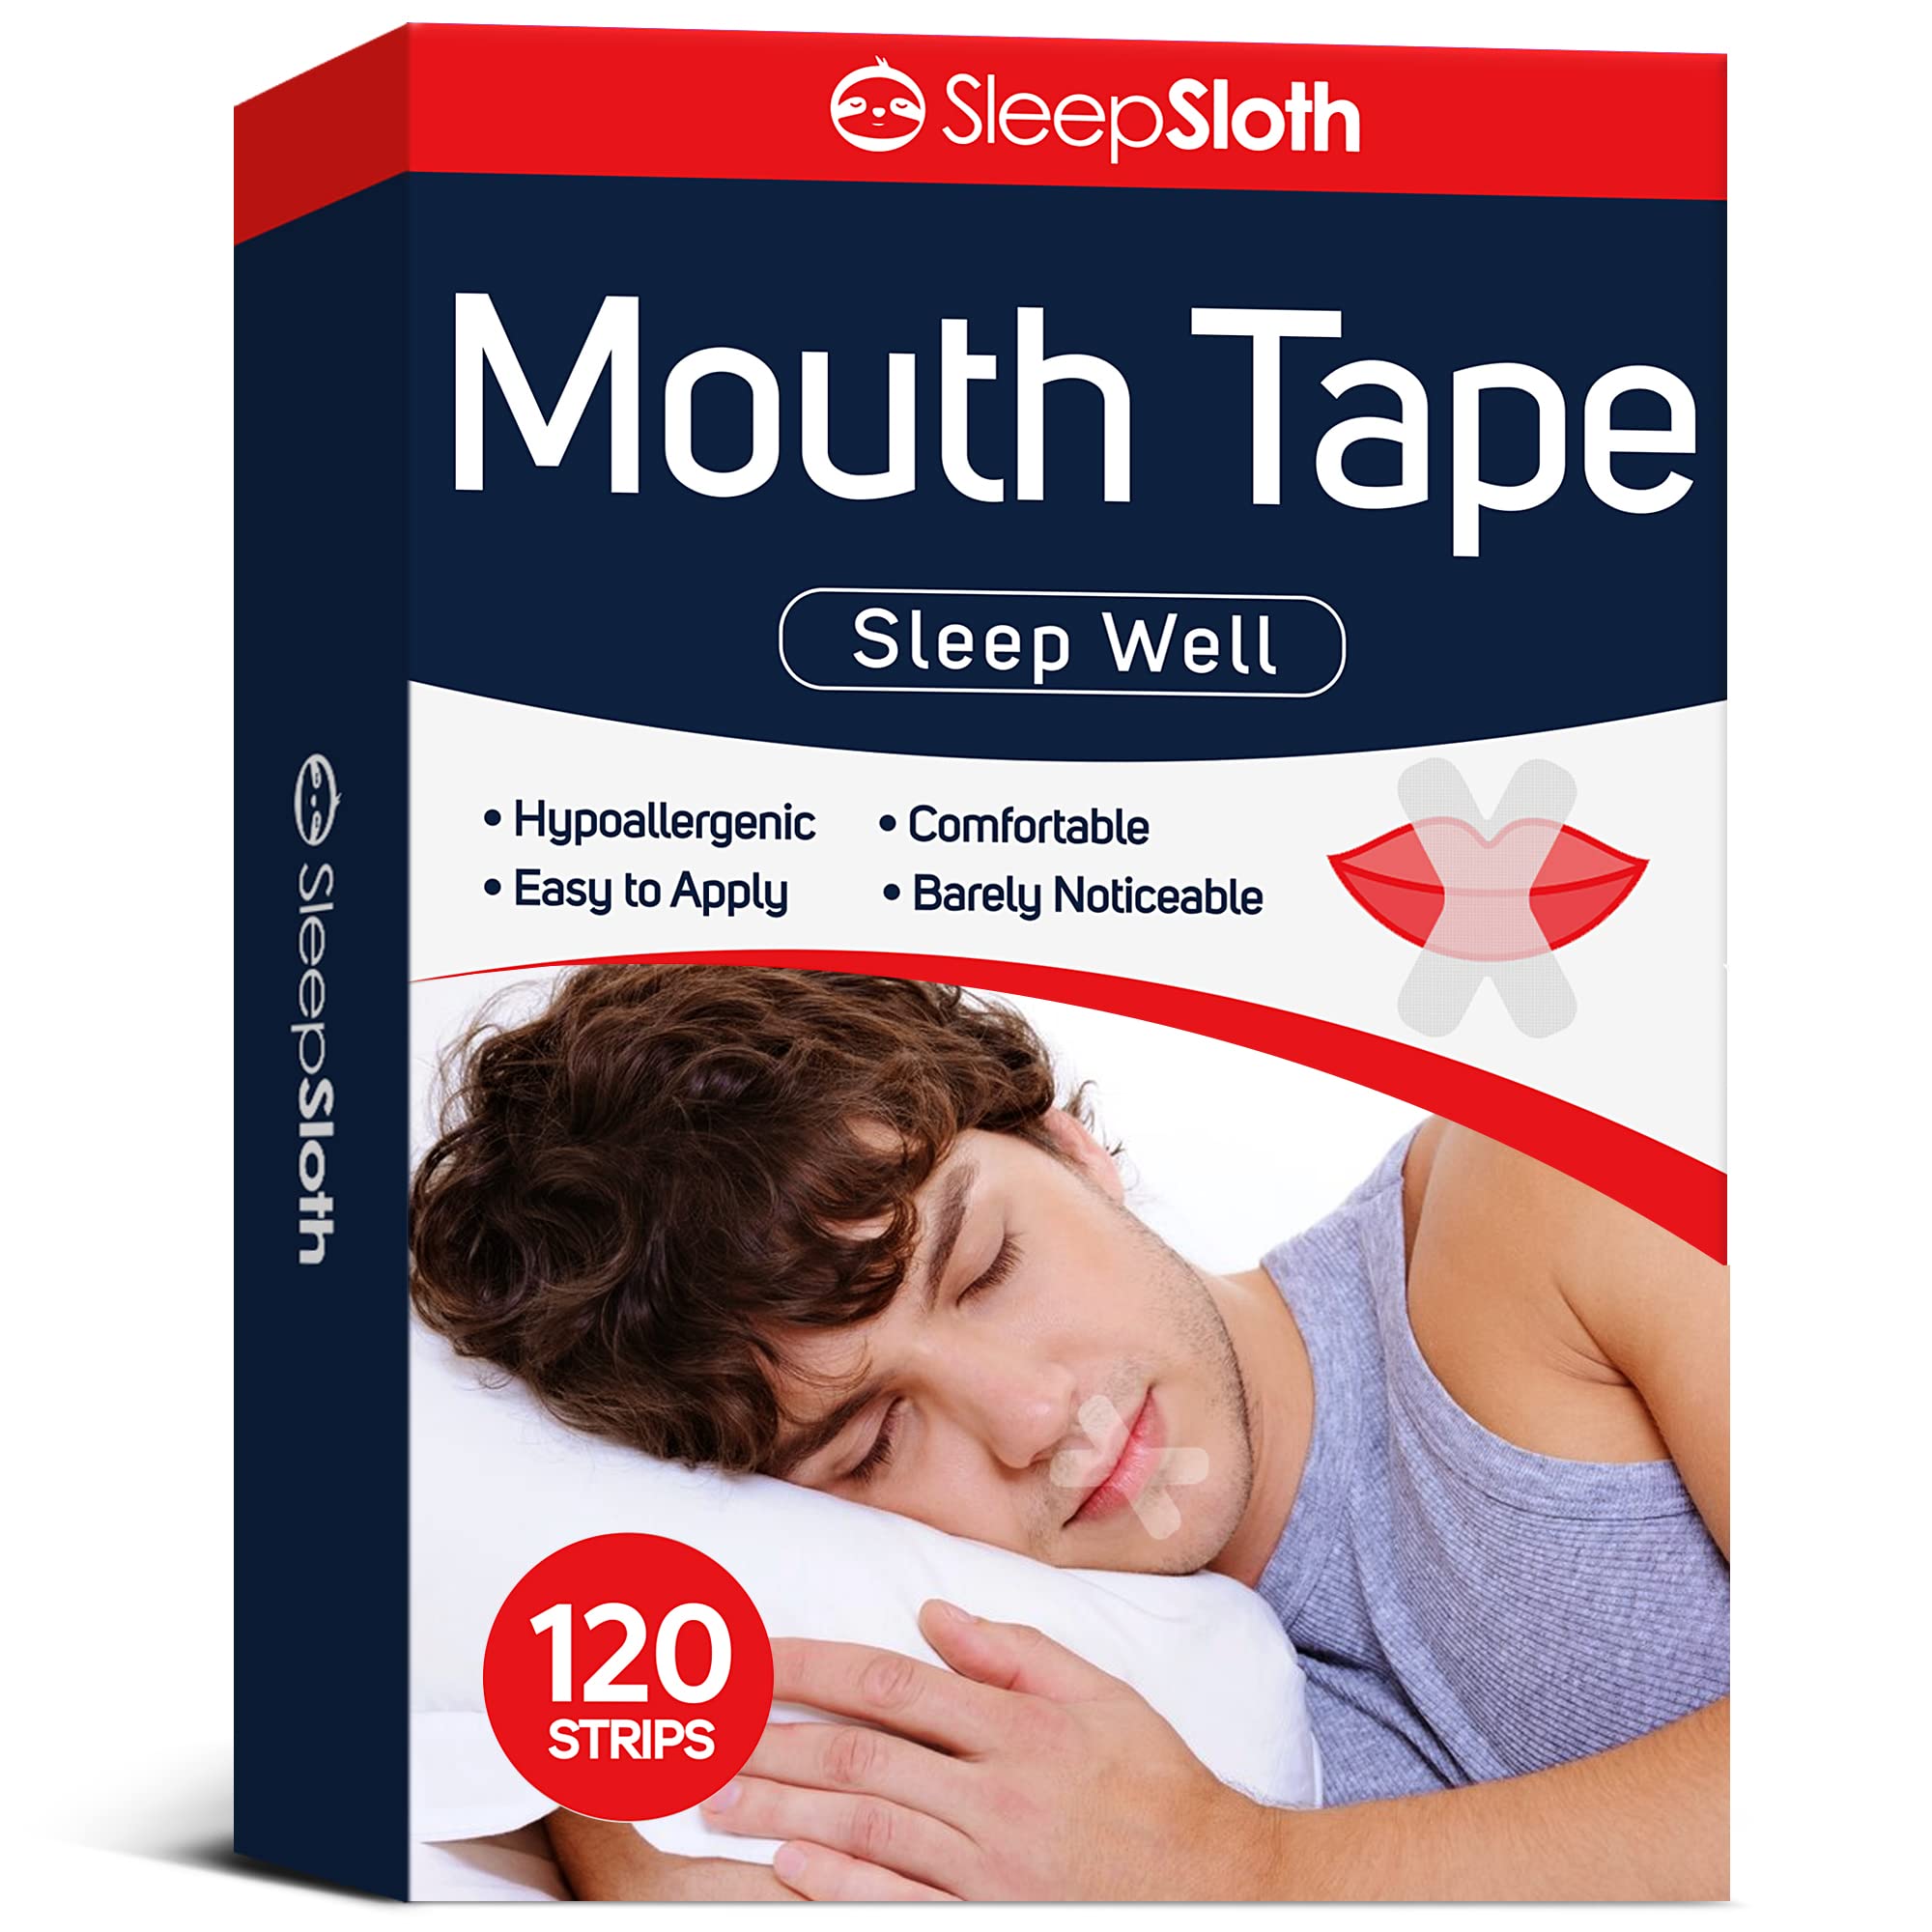 Can mouth tape help improve snoring and apnea treatment? - My Sleep Device